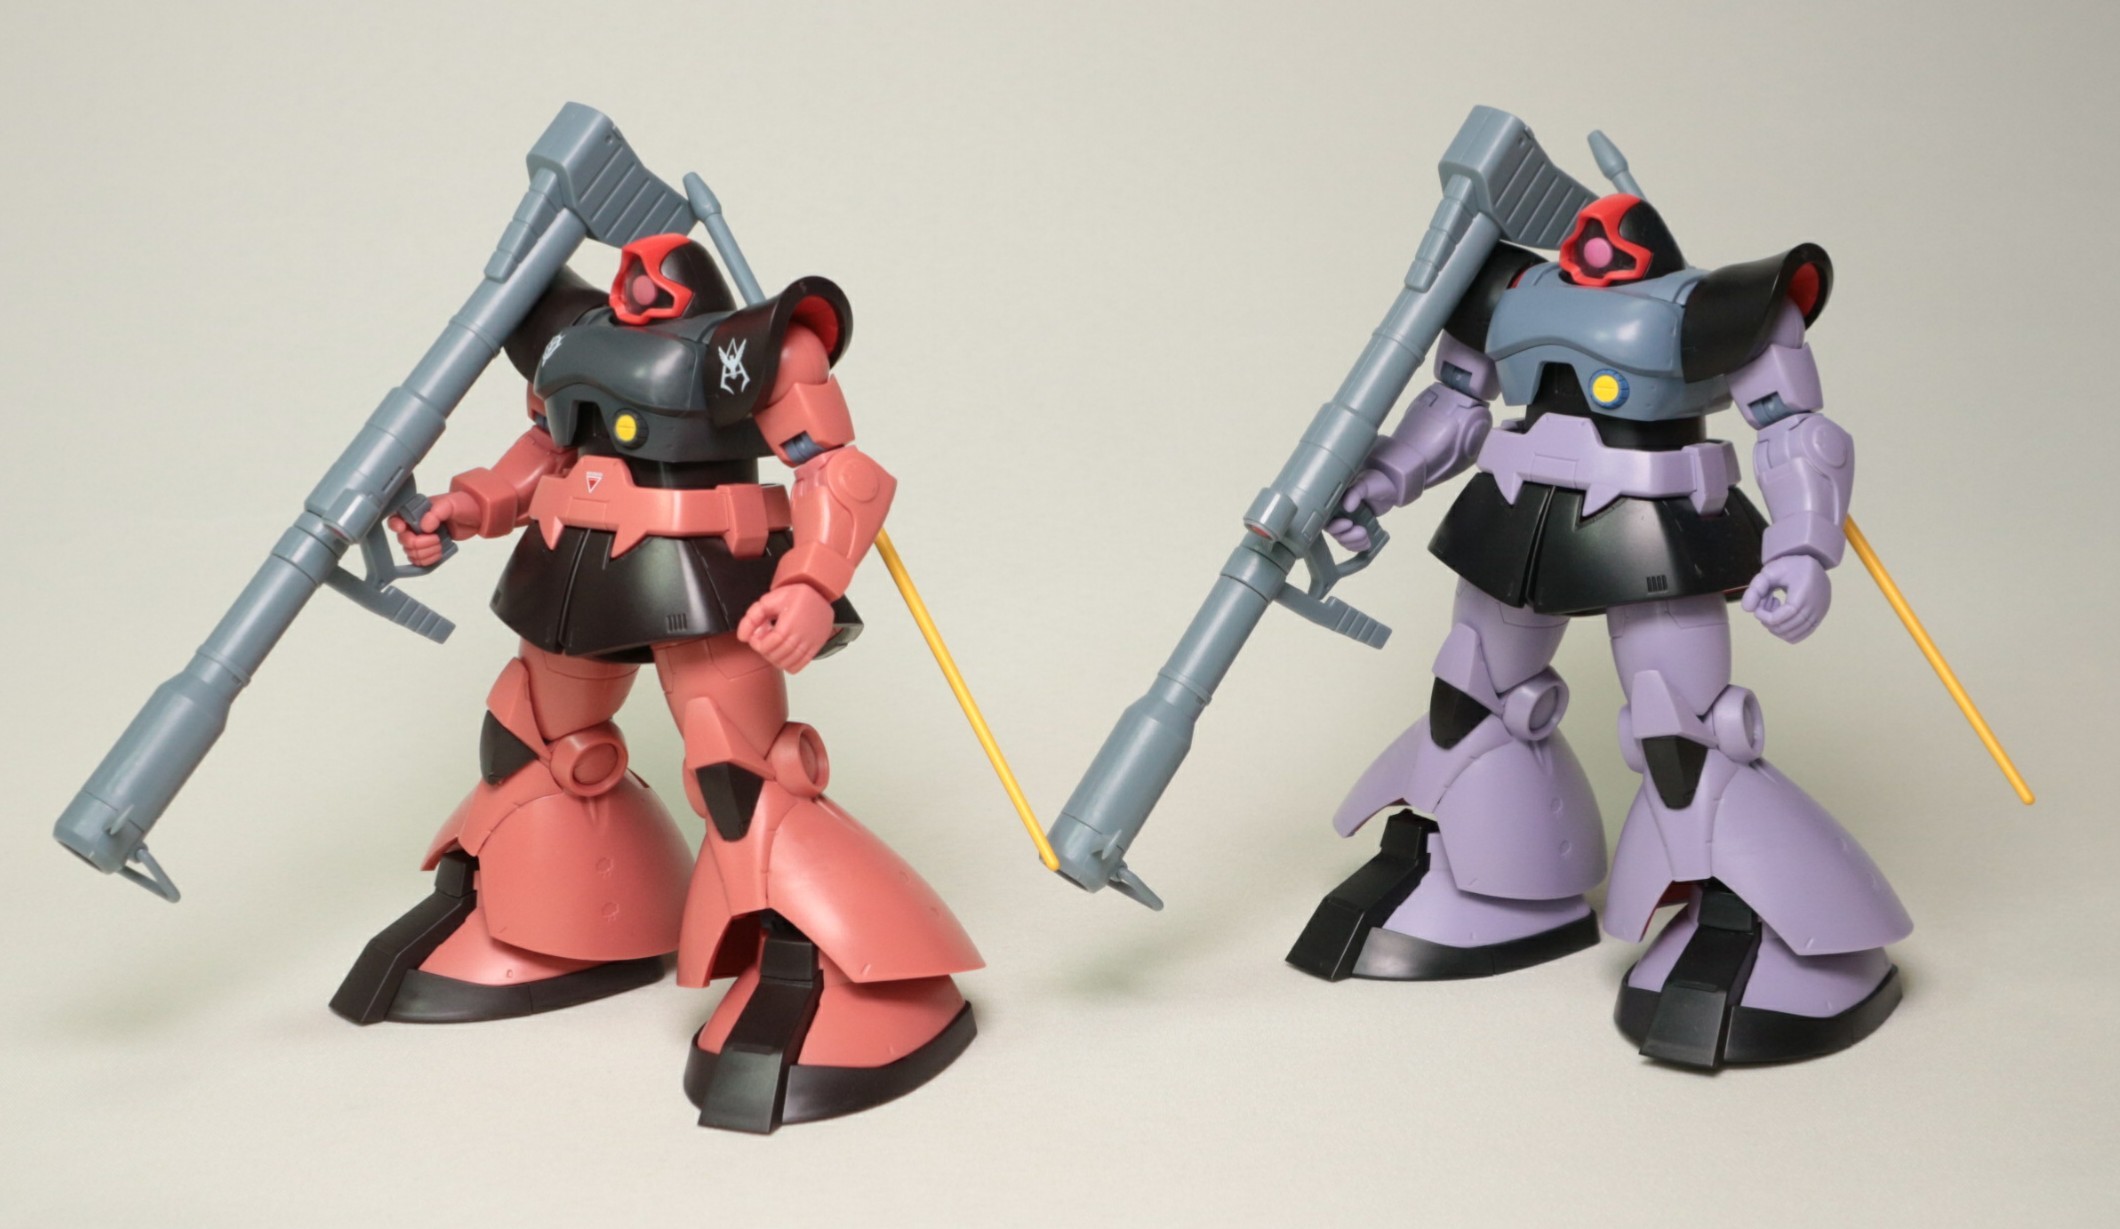 ROBOT魂 〈SIDE MS〉 MS-09RS シャア専用リック・ドム ver. A.N.I.M.E. 